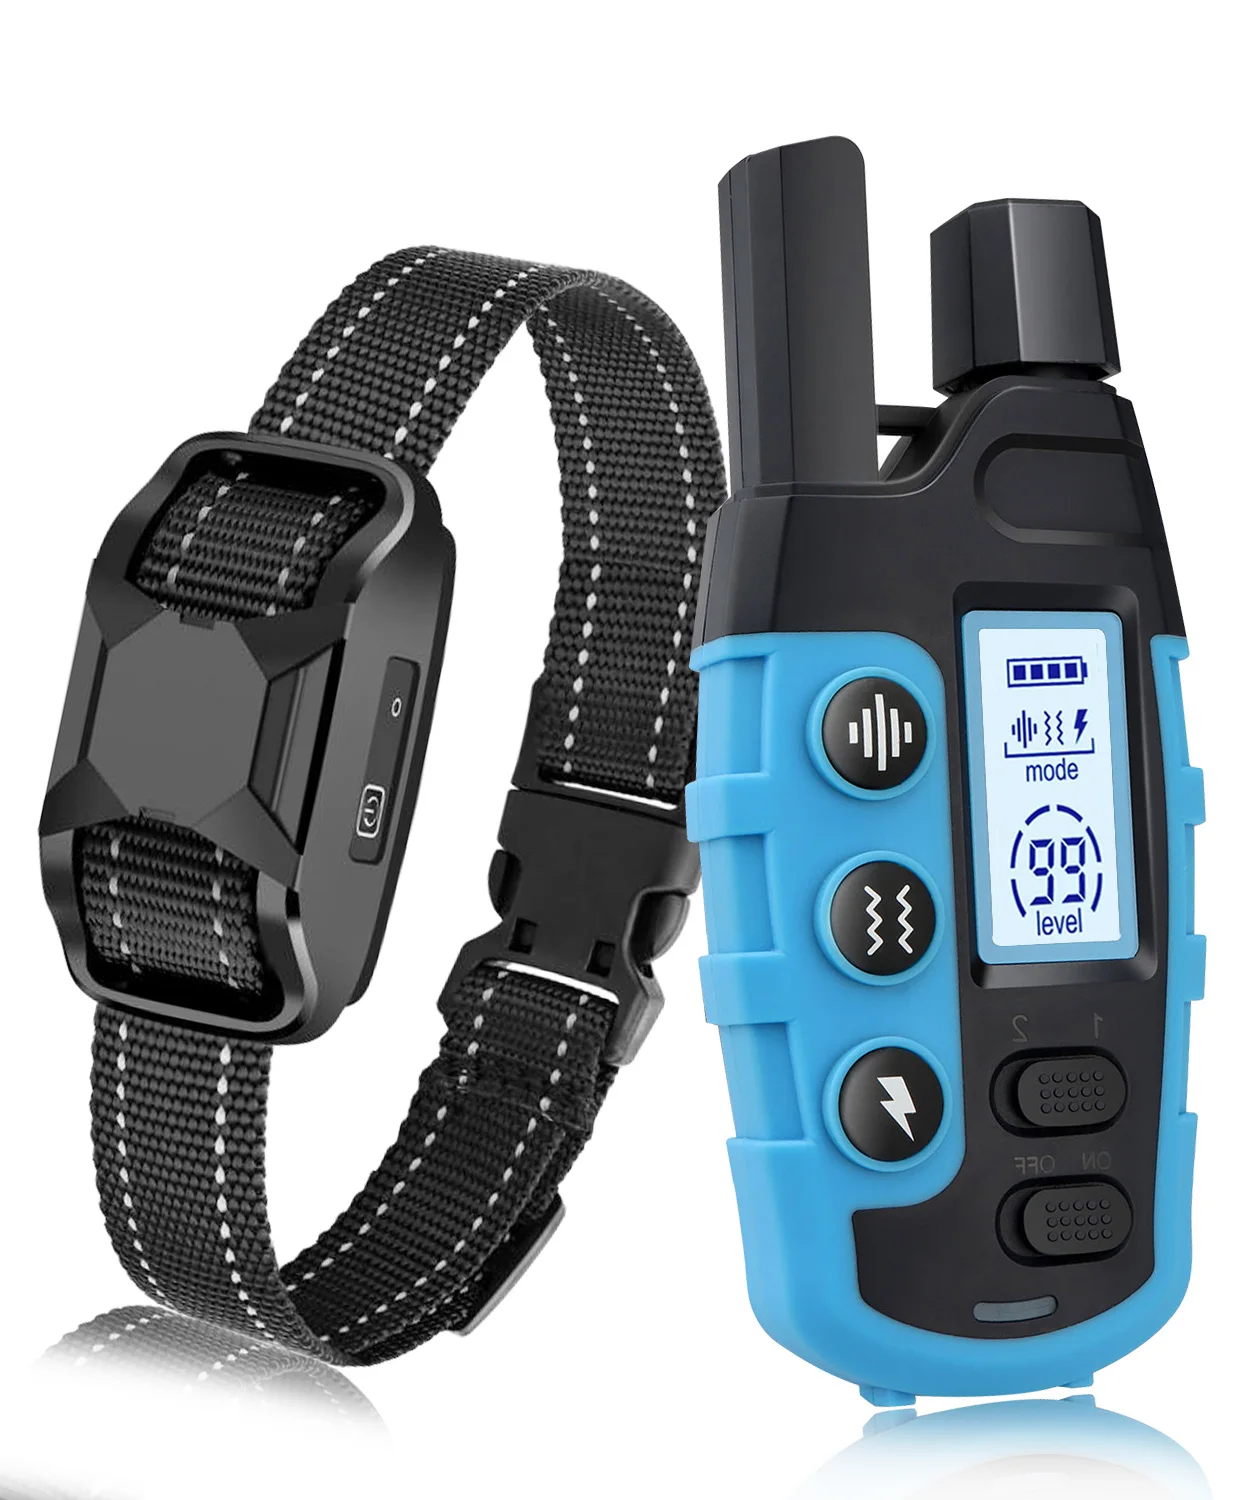 

Accessories Strap Electric Canine Large Supplies Dogs 3000ft 900m Shock Bark Equipment For Dog Training No Collar